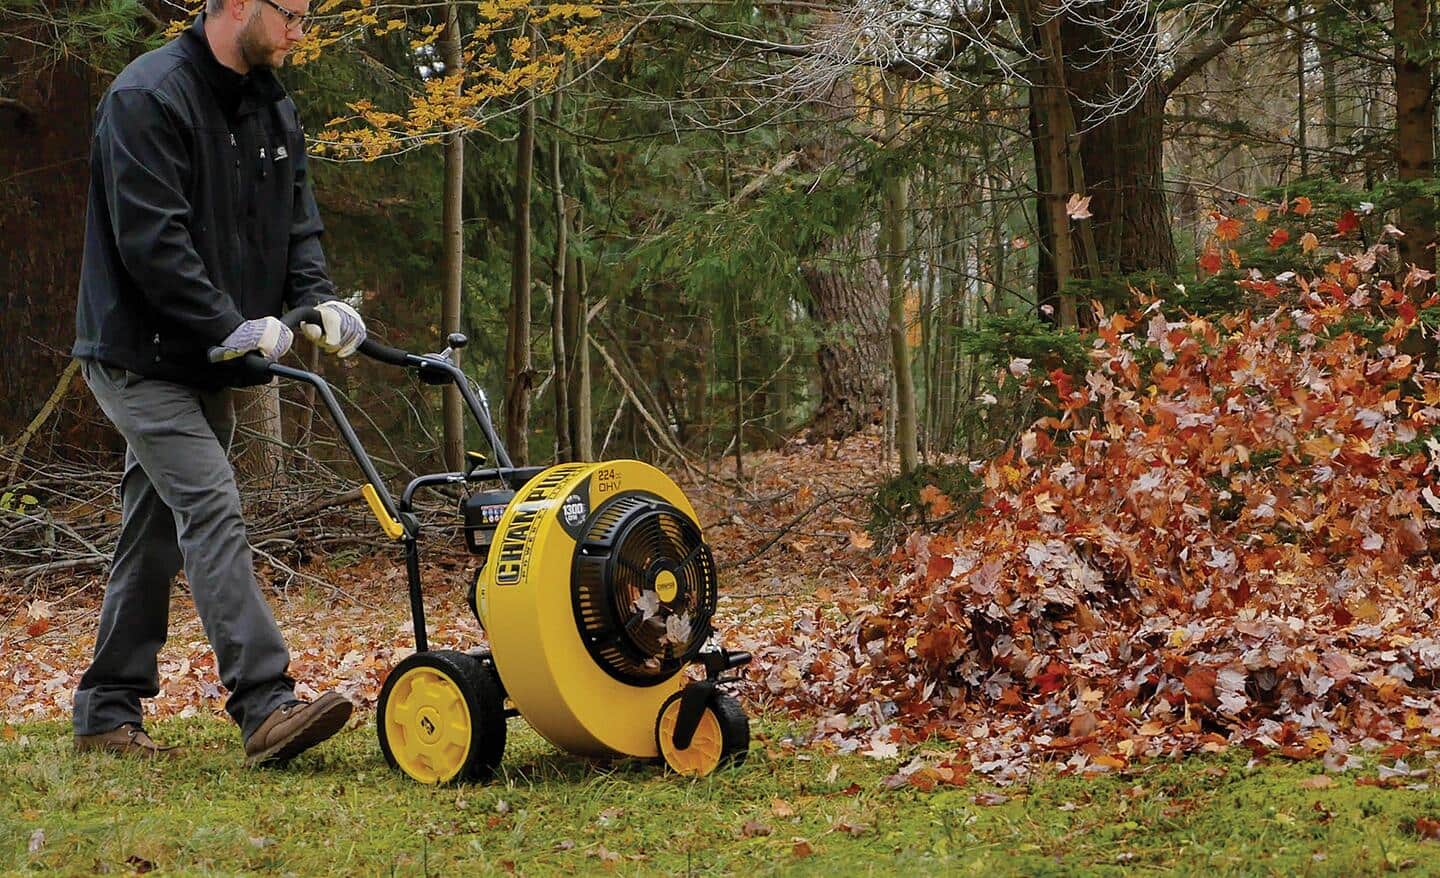 A worker clears leaves in a yard with a push blower.